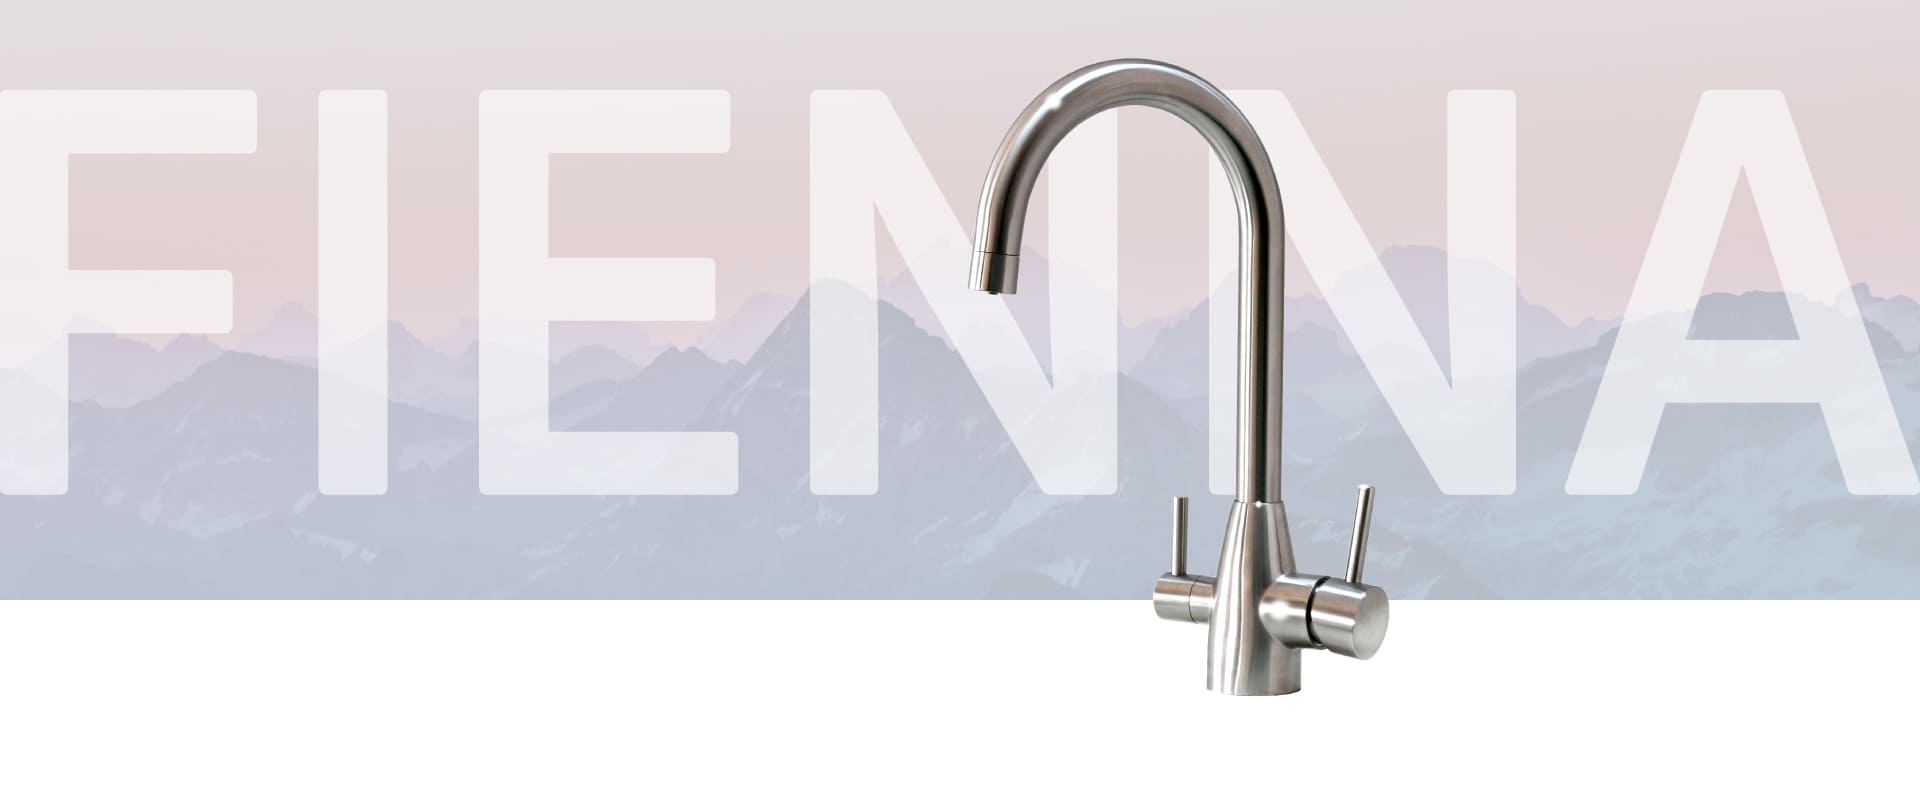 Fienna 3-way faucet for osmosis systems - in Chrome